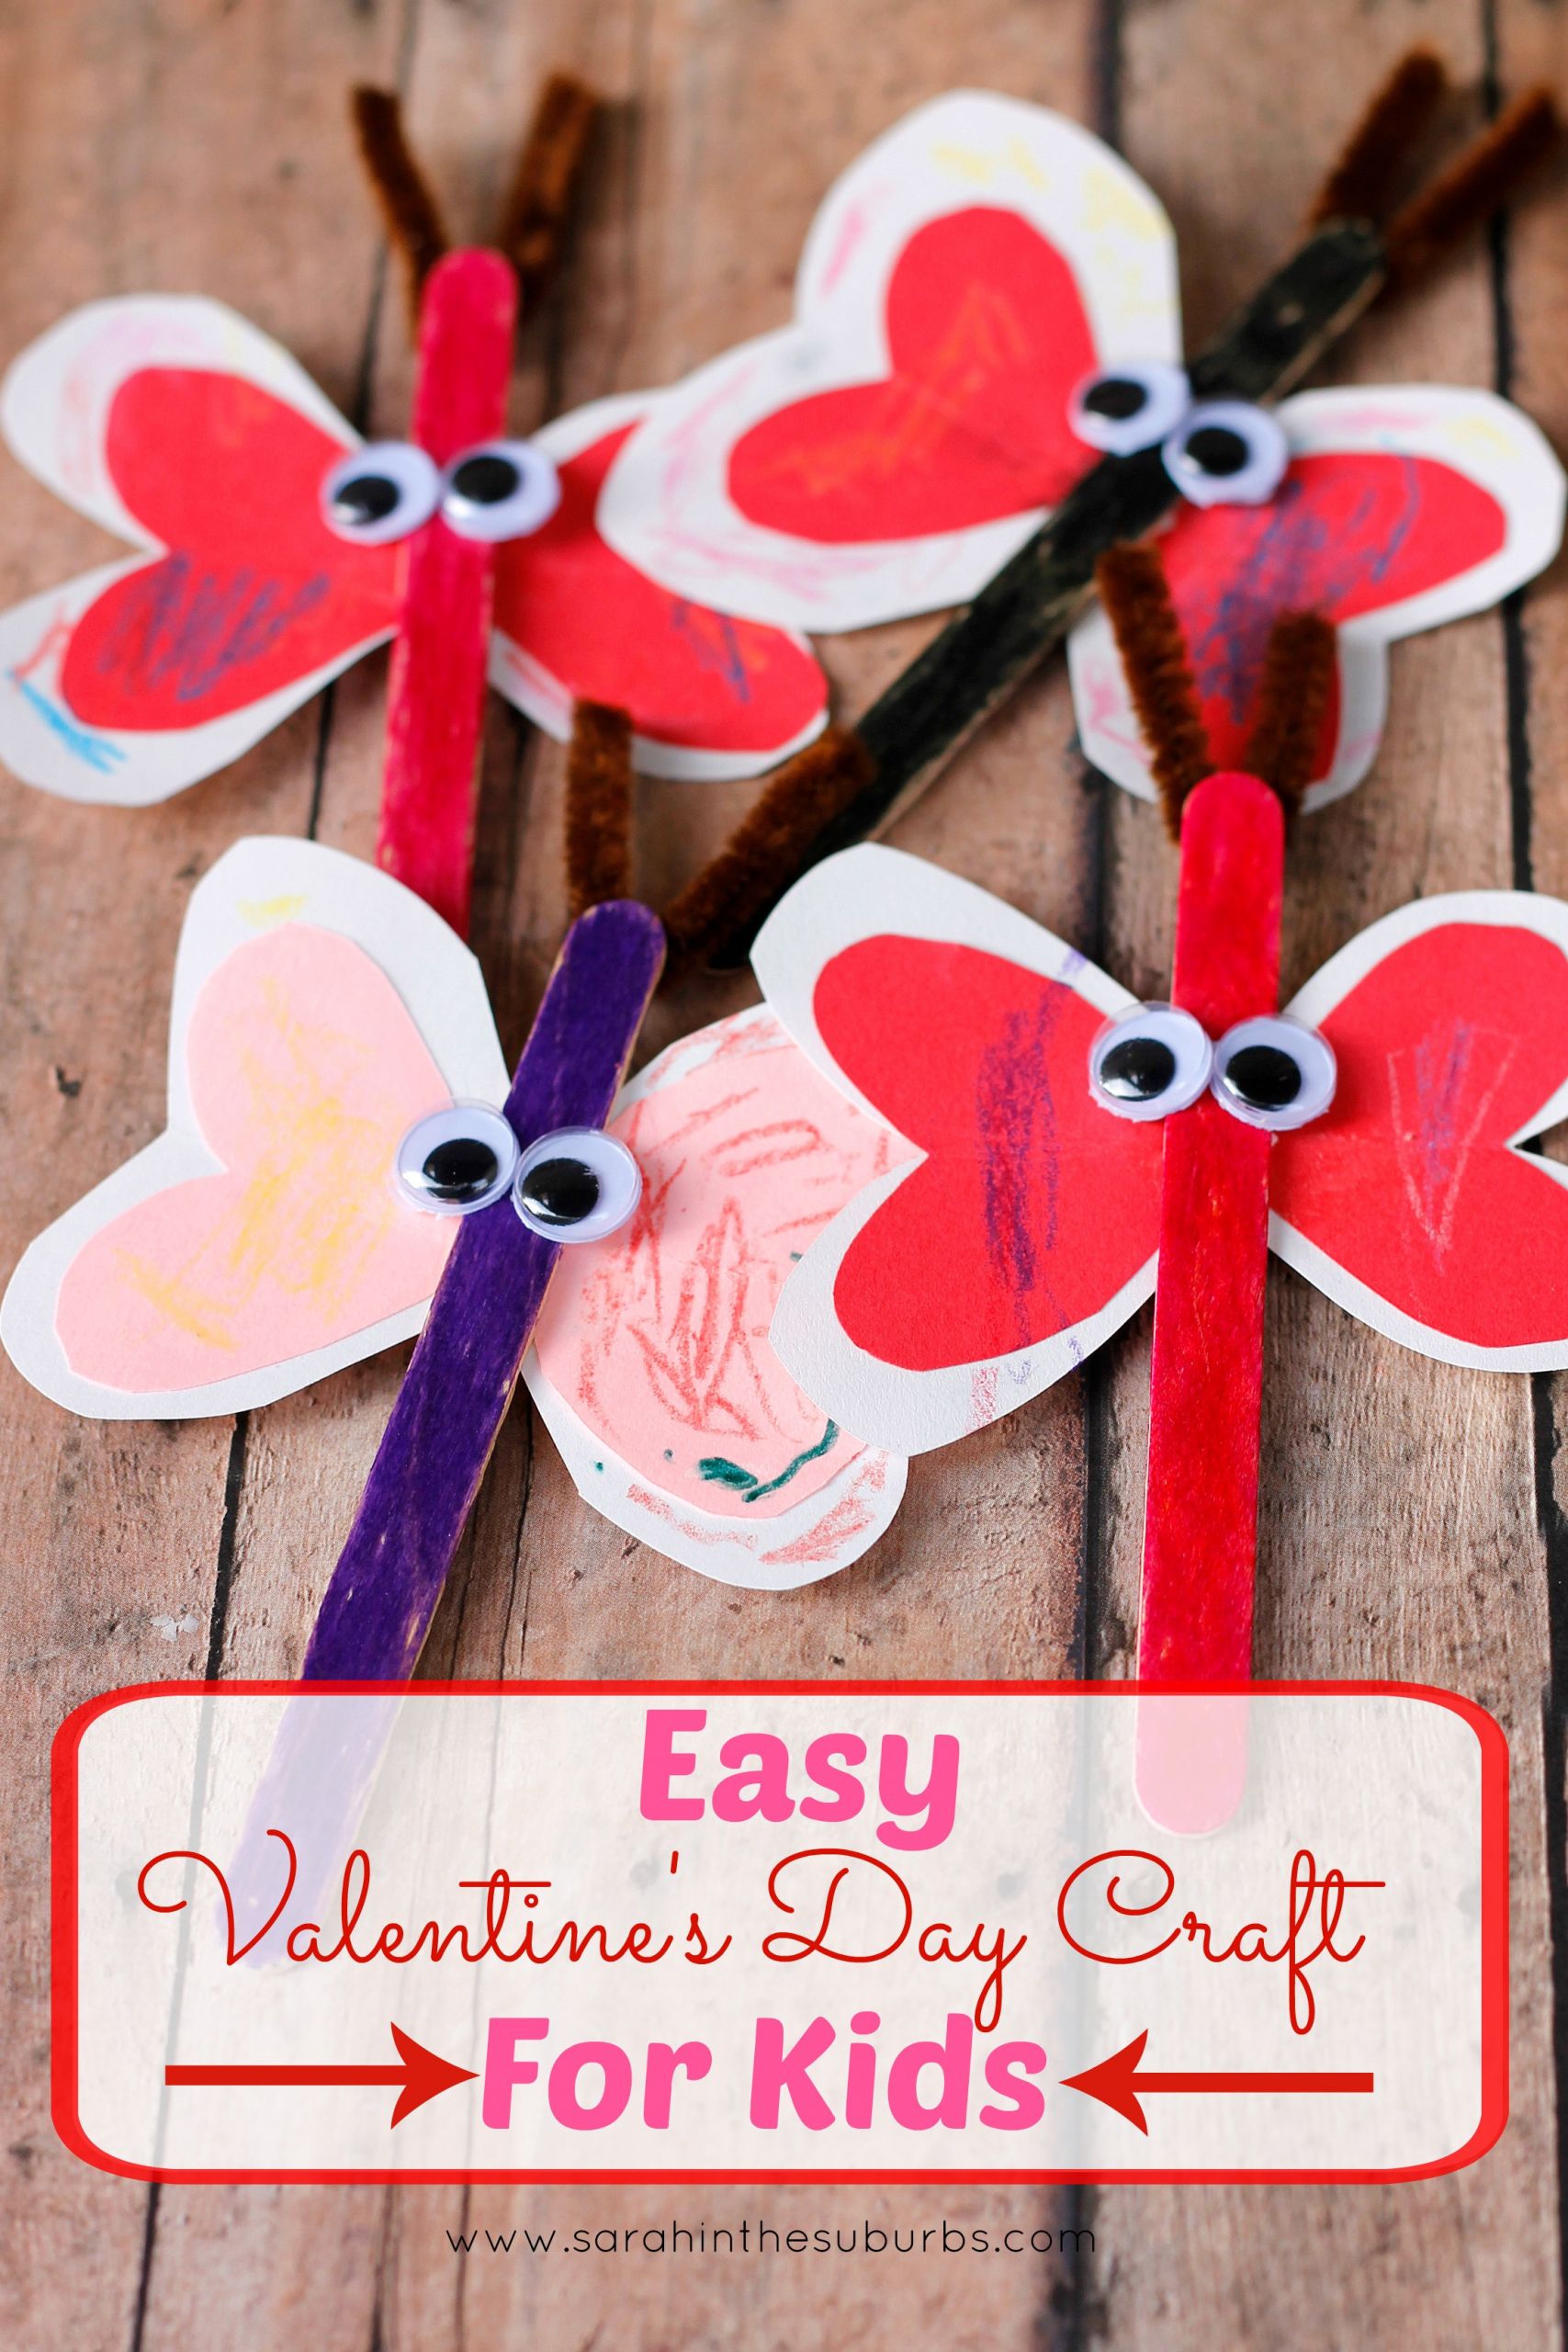 Easy Kids Craft Ideas
 Love Bug Valentine s Day Craft for Kids Sarah in the Suburbs